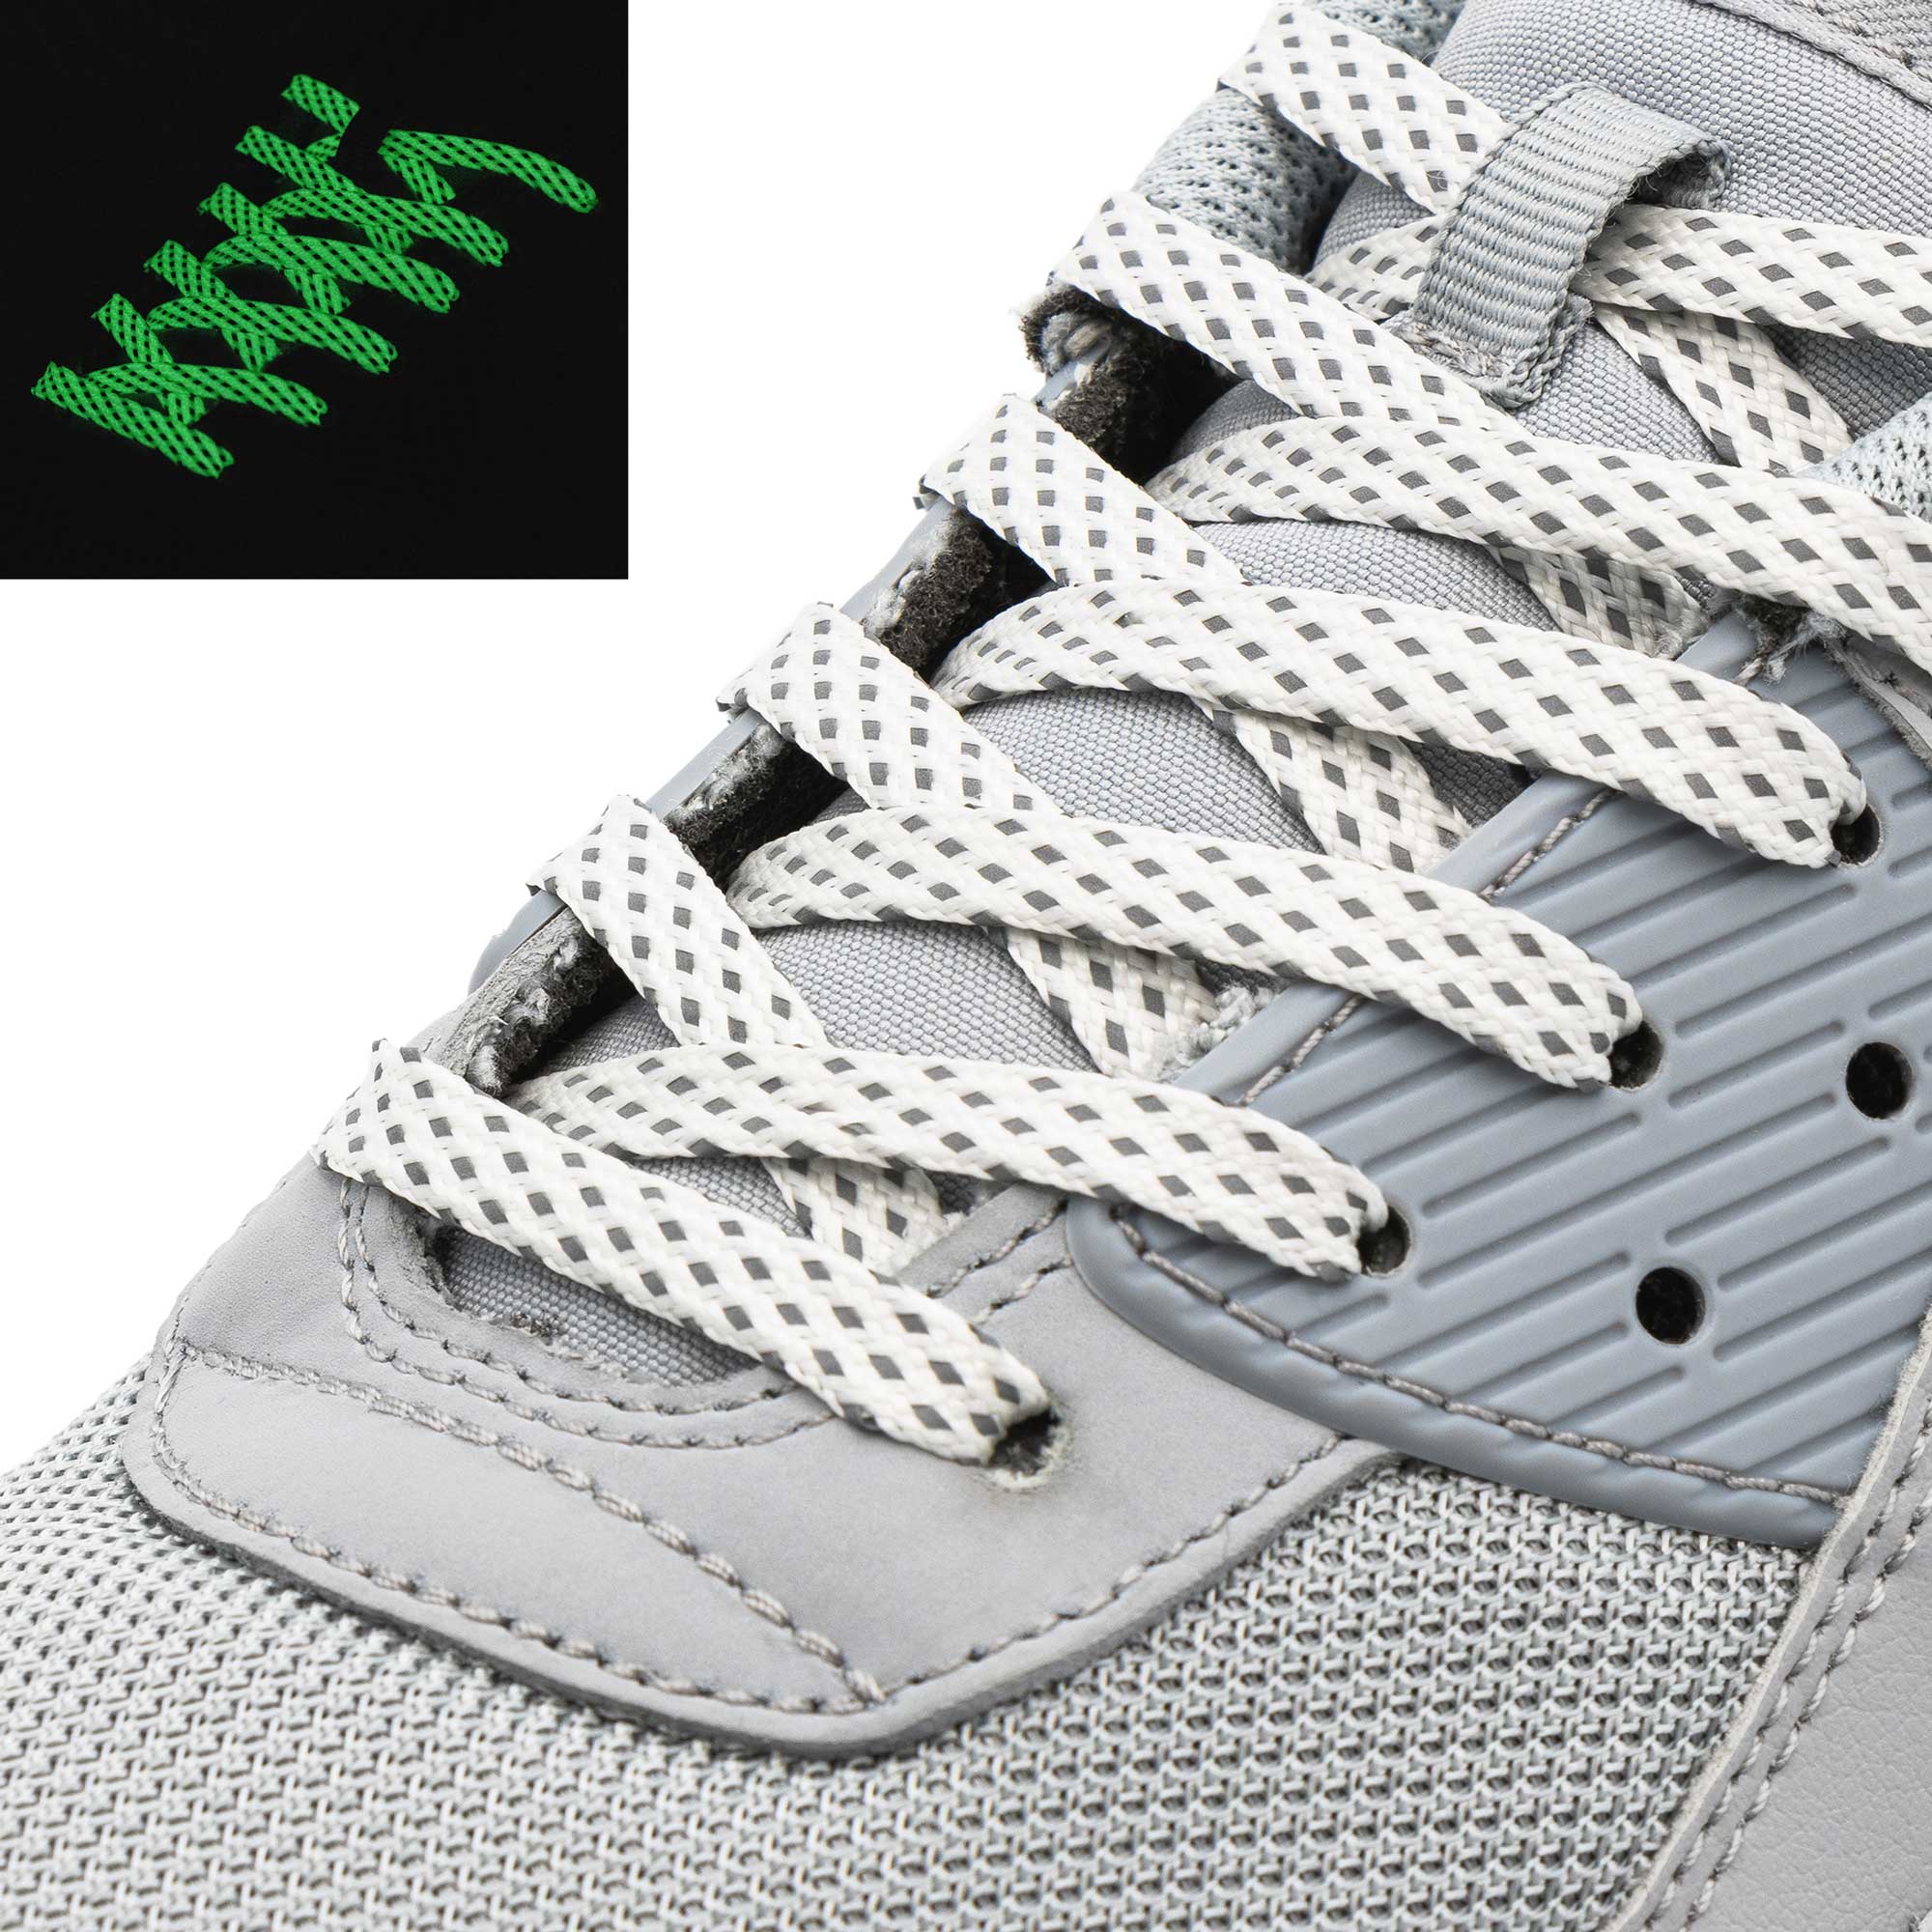 Glow In The Dark - Reflective Flat Laces 2.0 - Angelus Direct